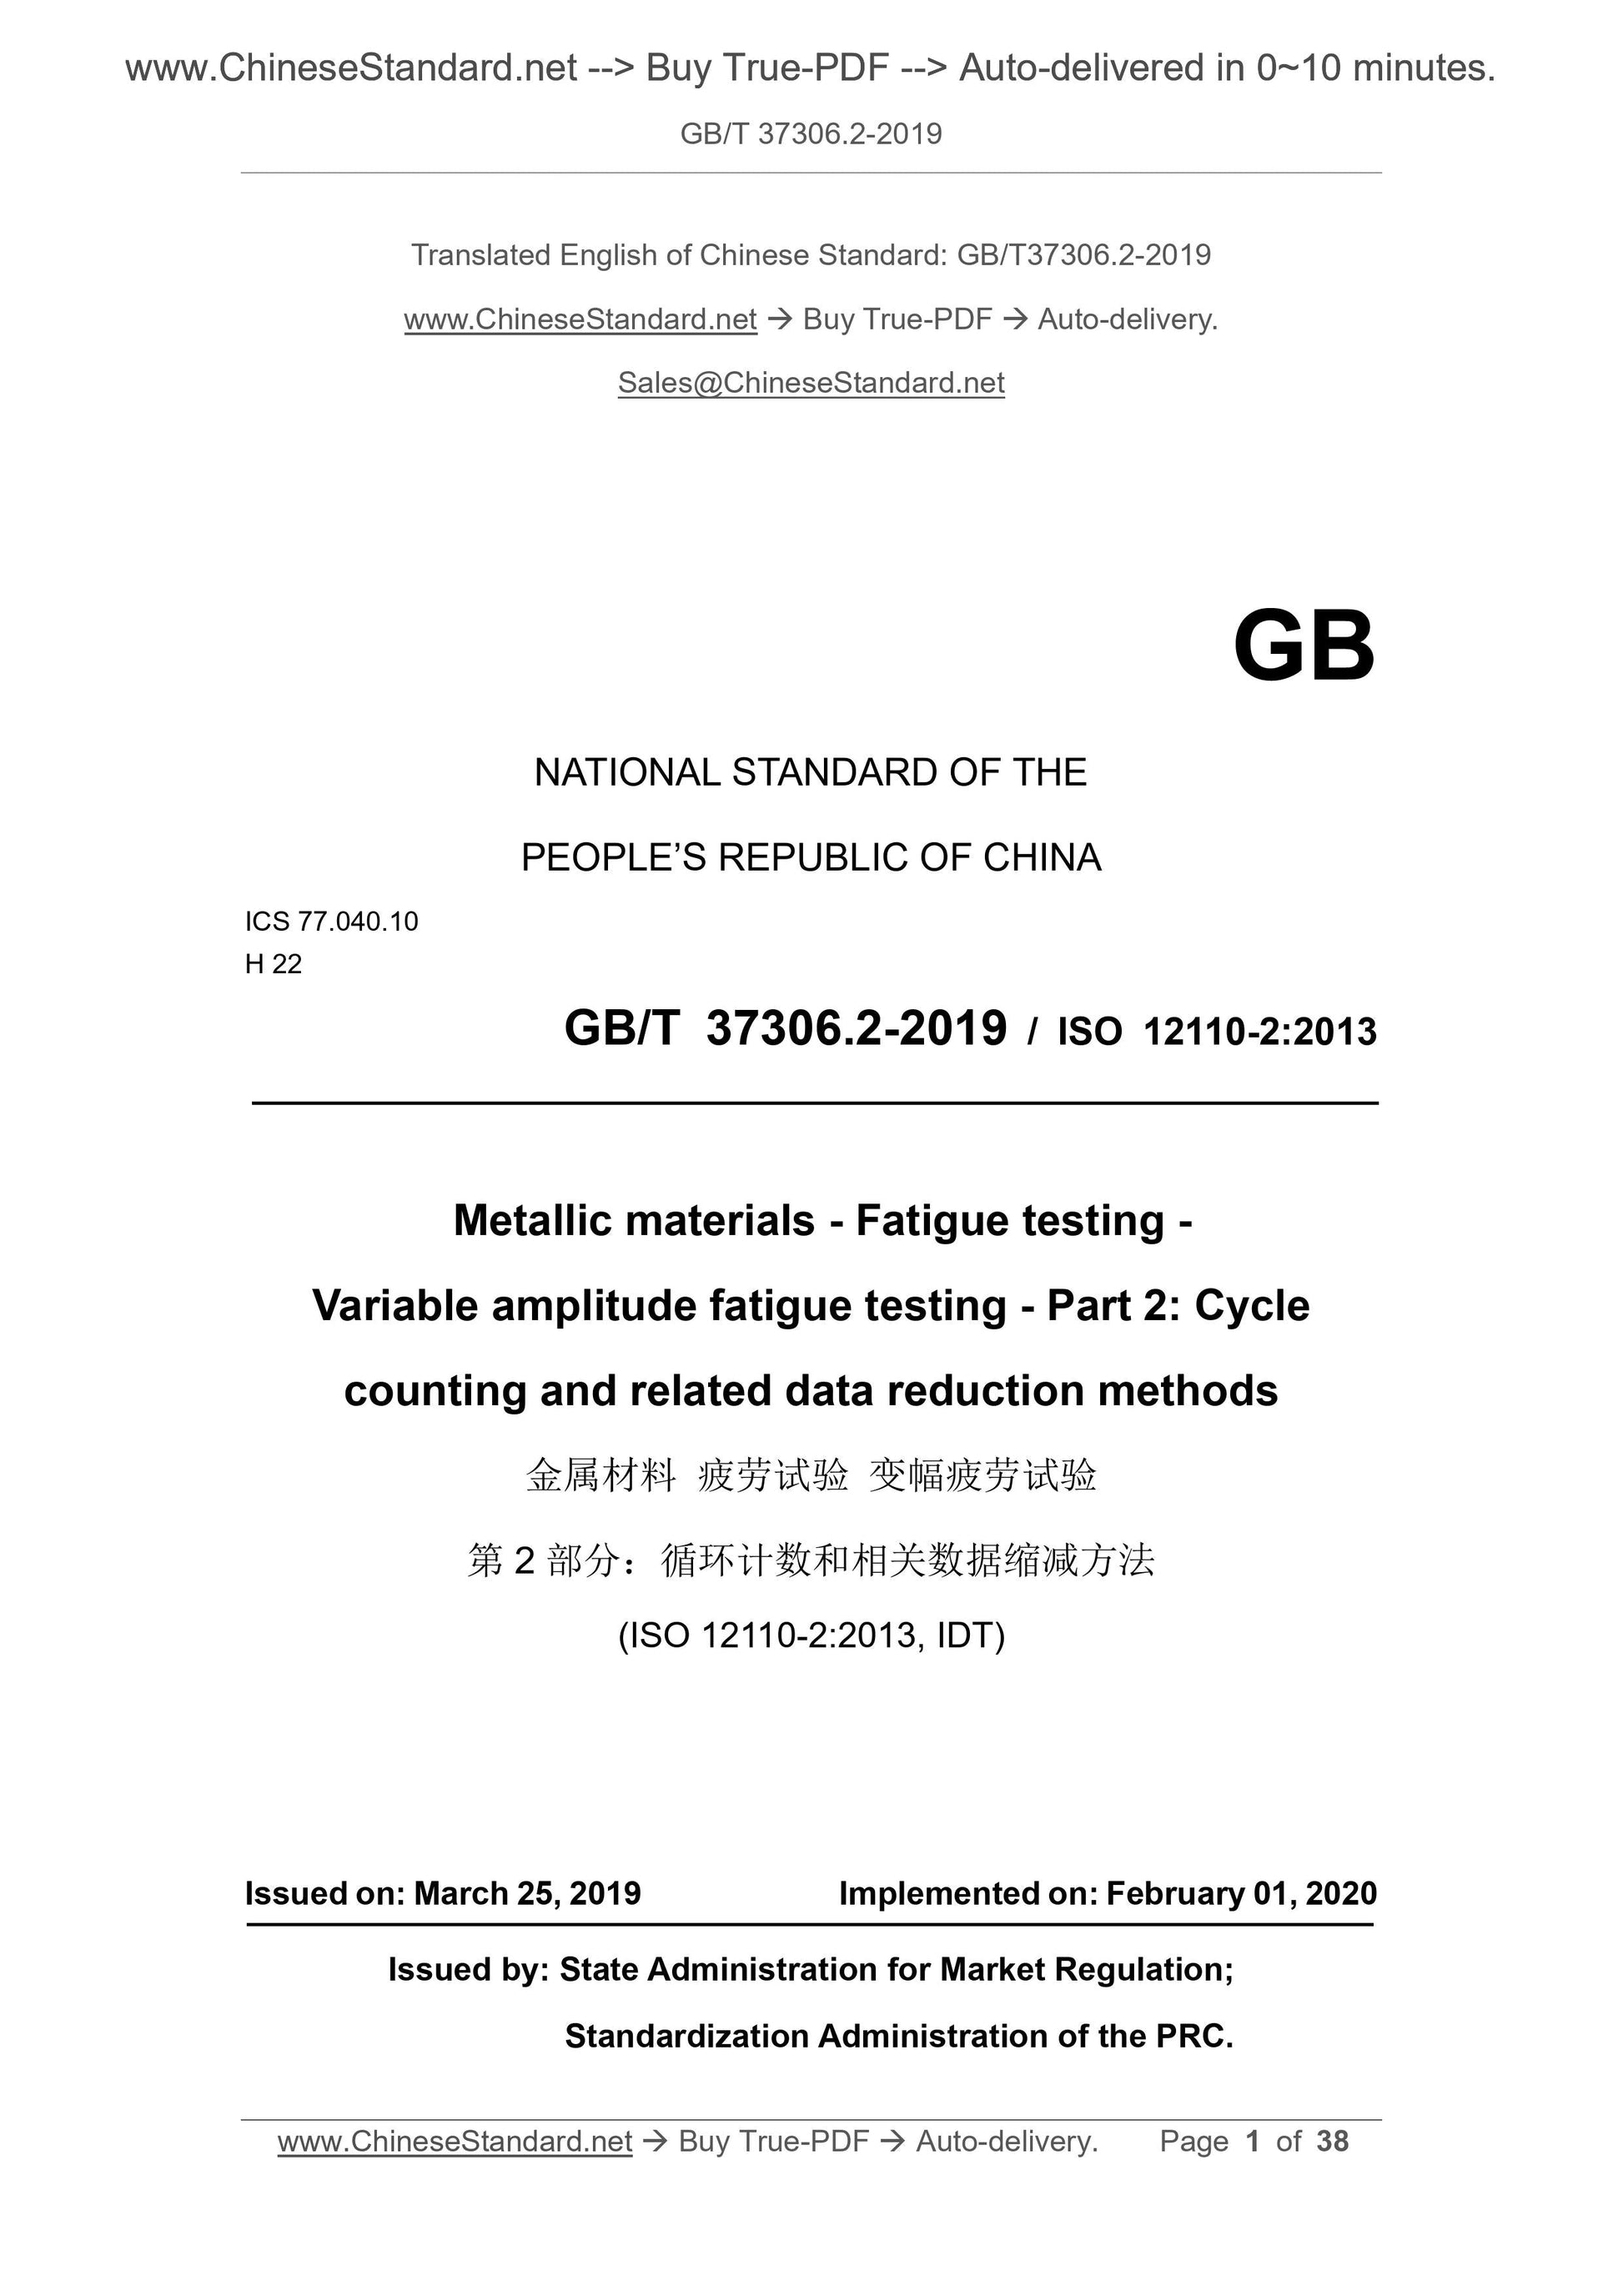 GB/T 37306.2-2019 Page 1